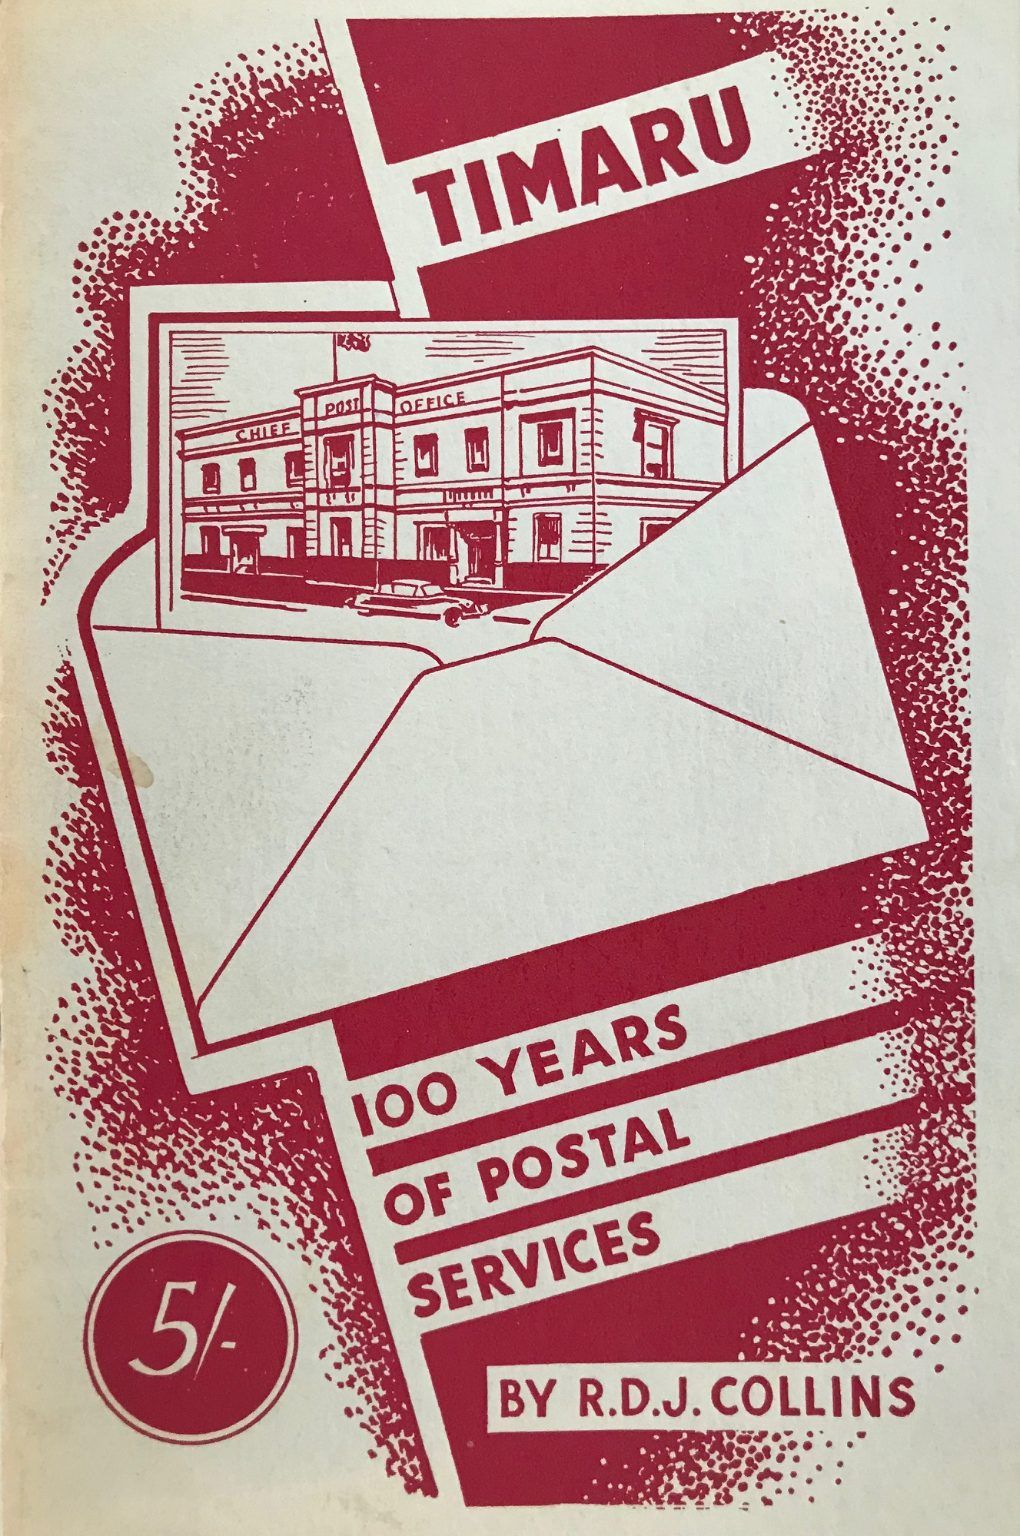 TIMARU: 100 Years of Postal Services